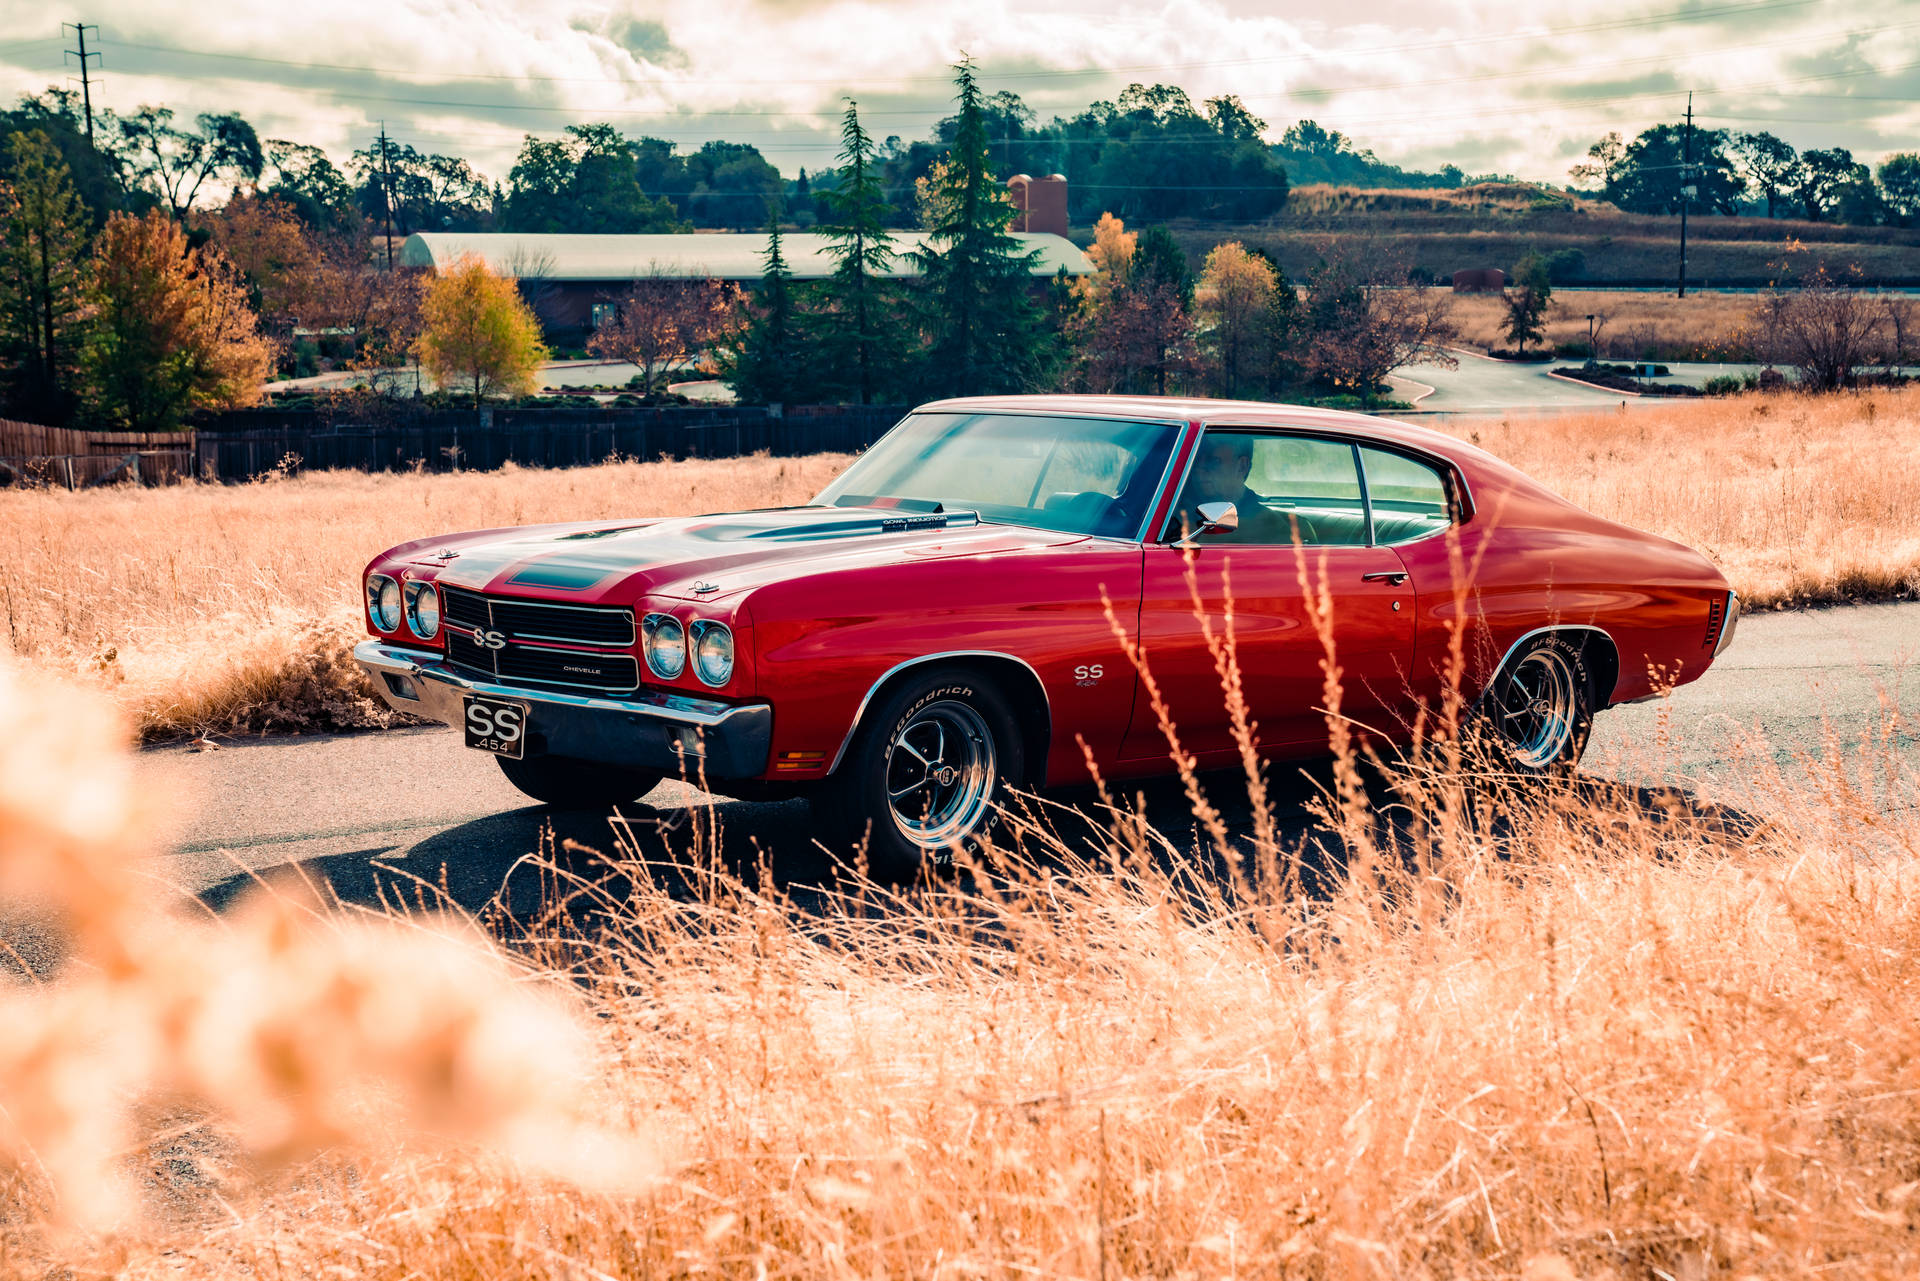 Chevrolet Chevelle On Wheat Field Background